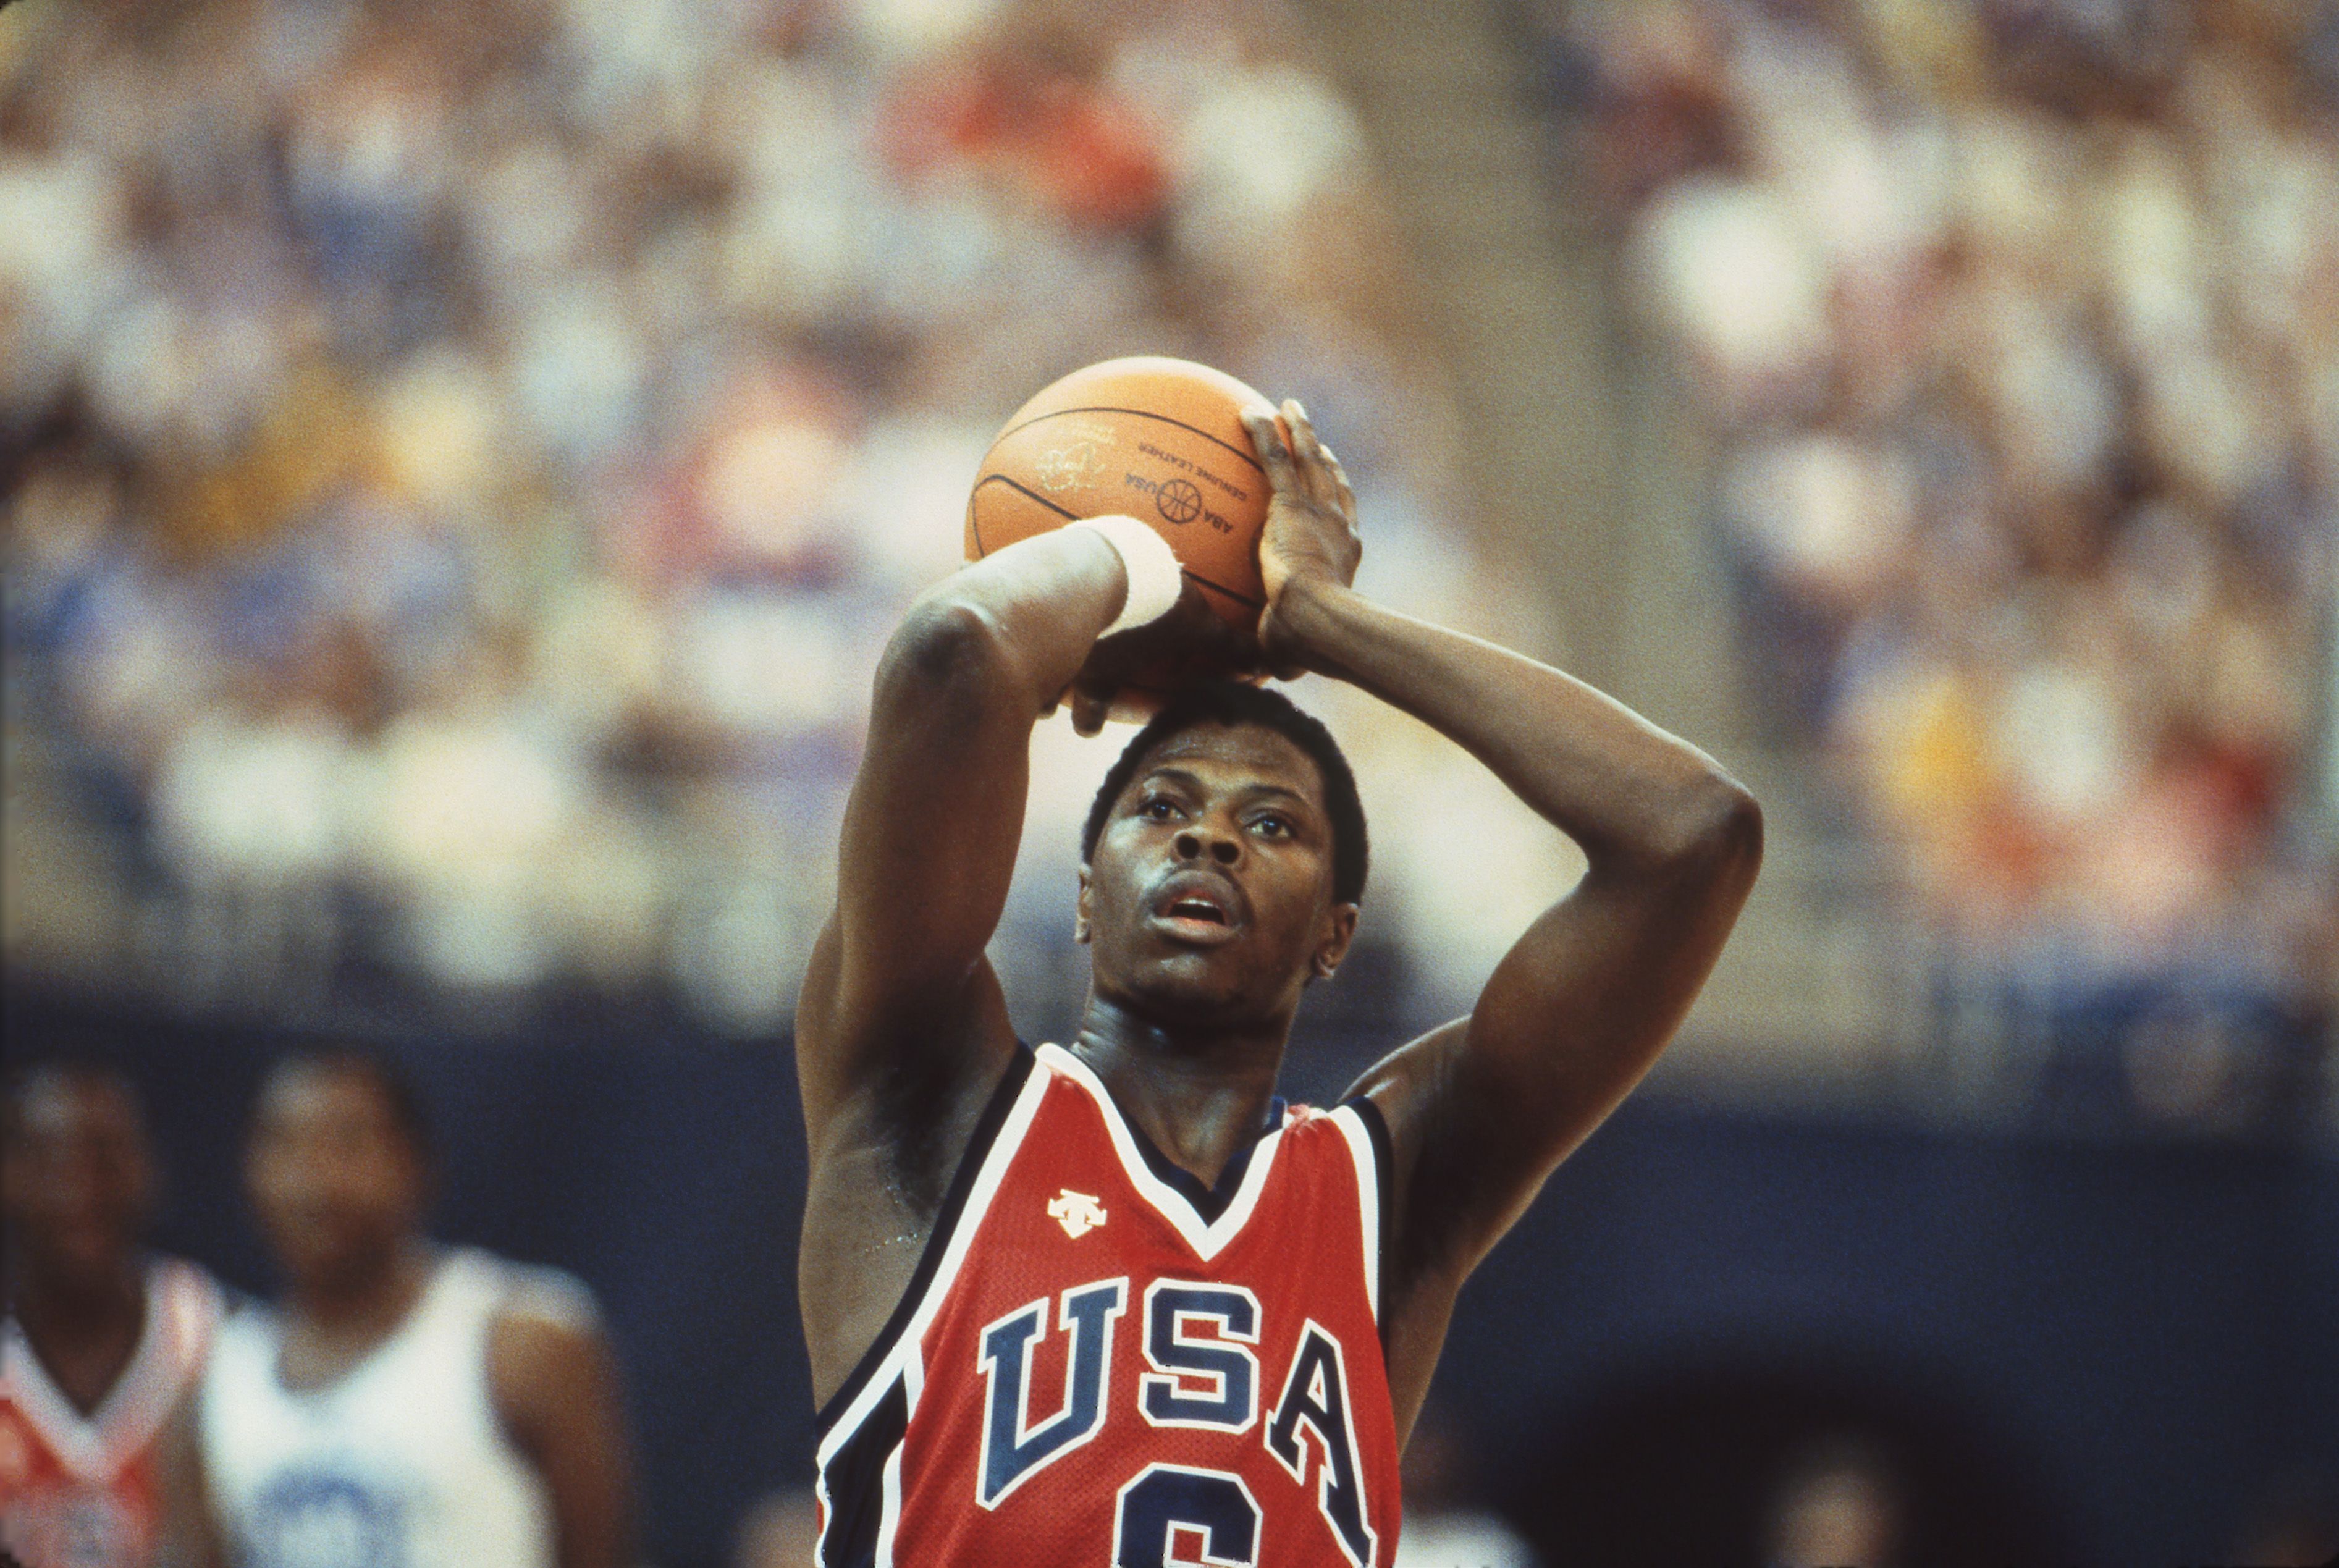 Patrick Ewing playing to the USA Men's Basketball team during the 1984 Olympics at the Los Angeles Memorial Coliseum | Photo: Getty Images